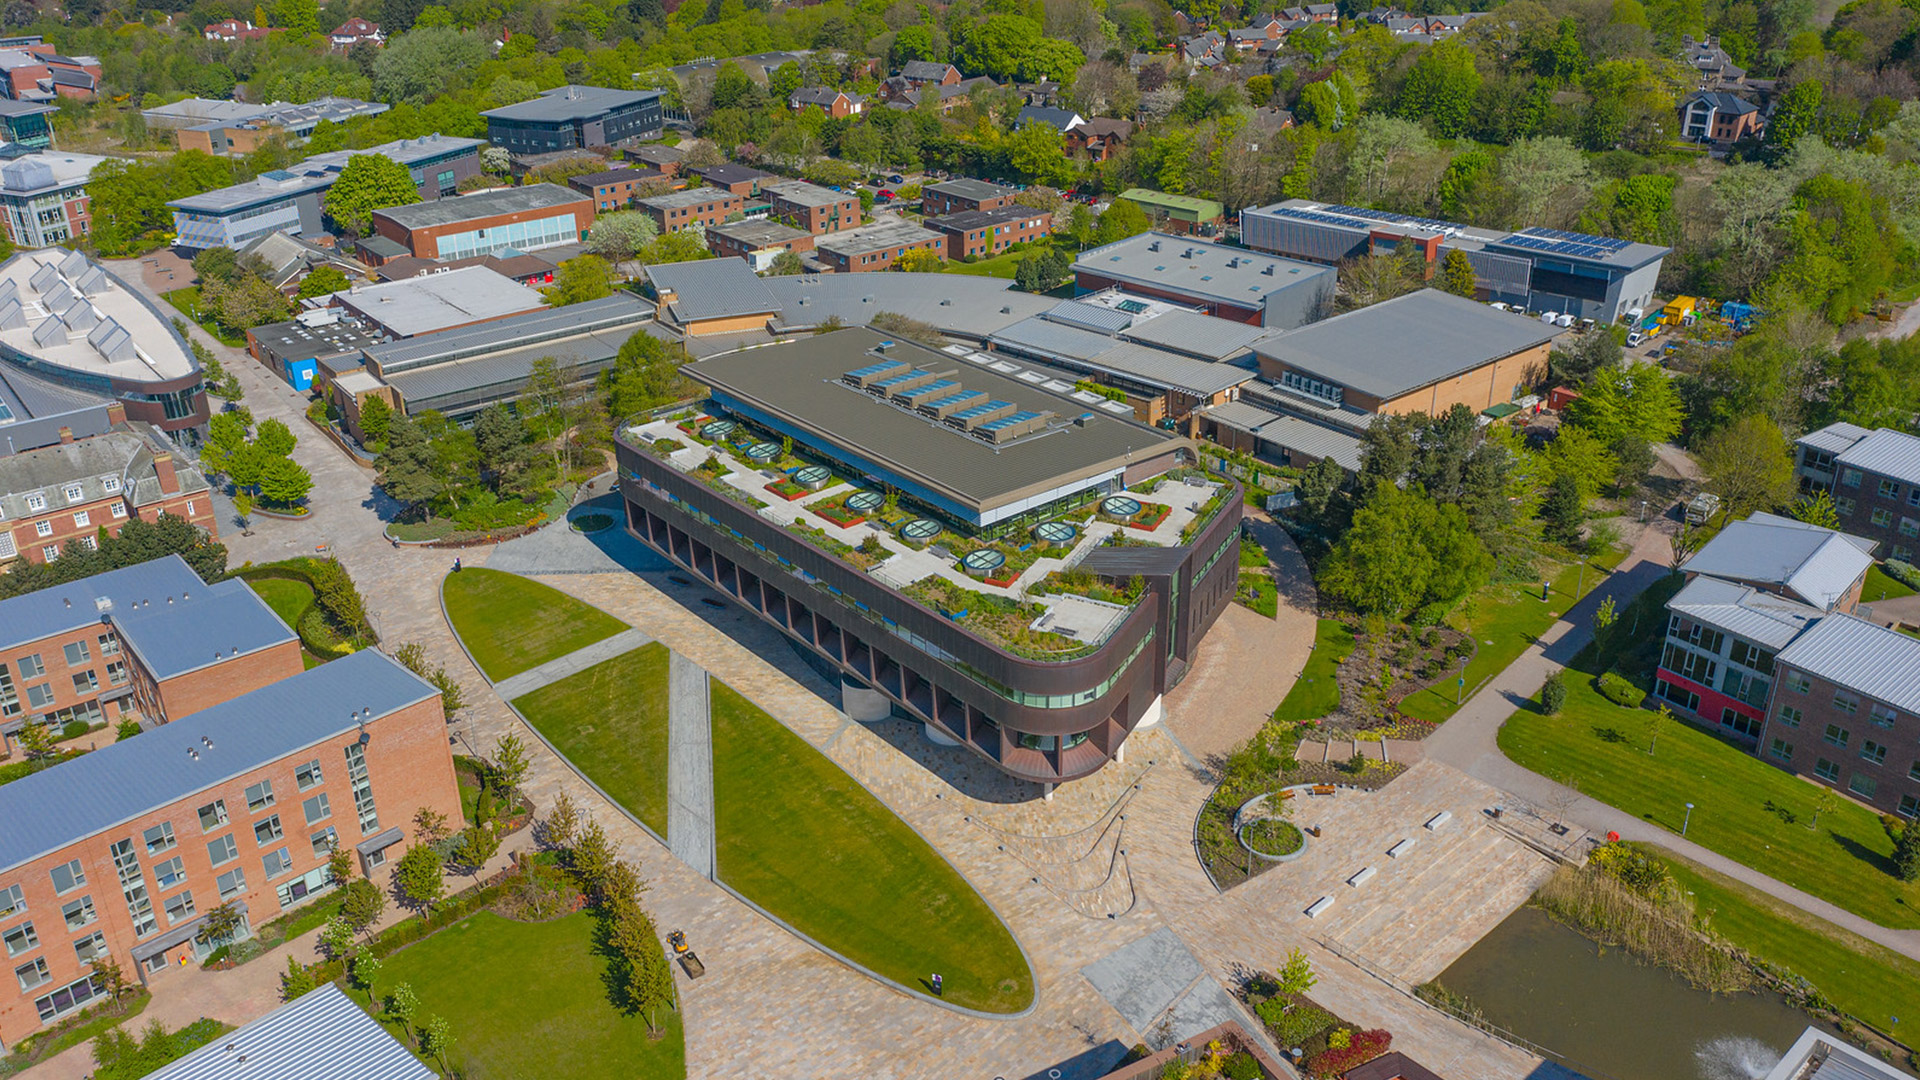 Aerial photograph of the campus focusing on the catalyst and wilson centre